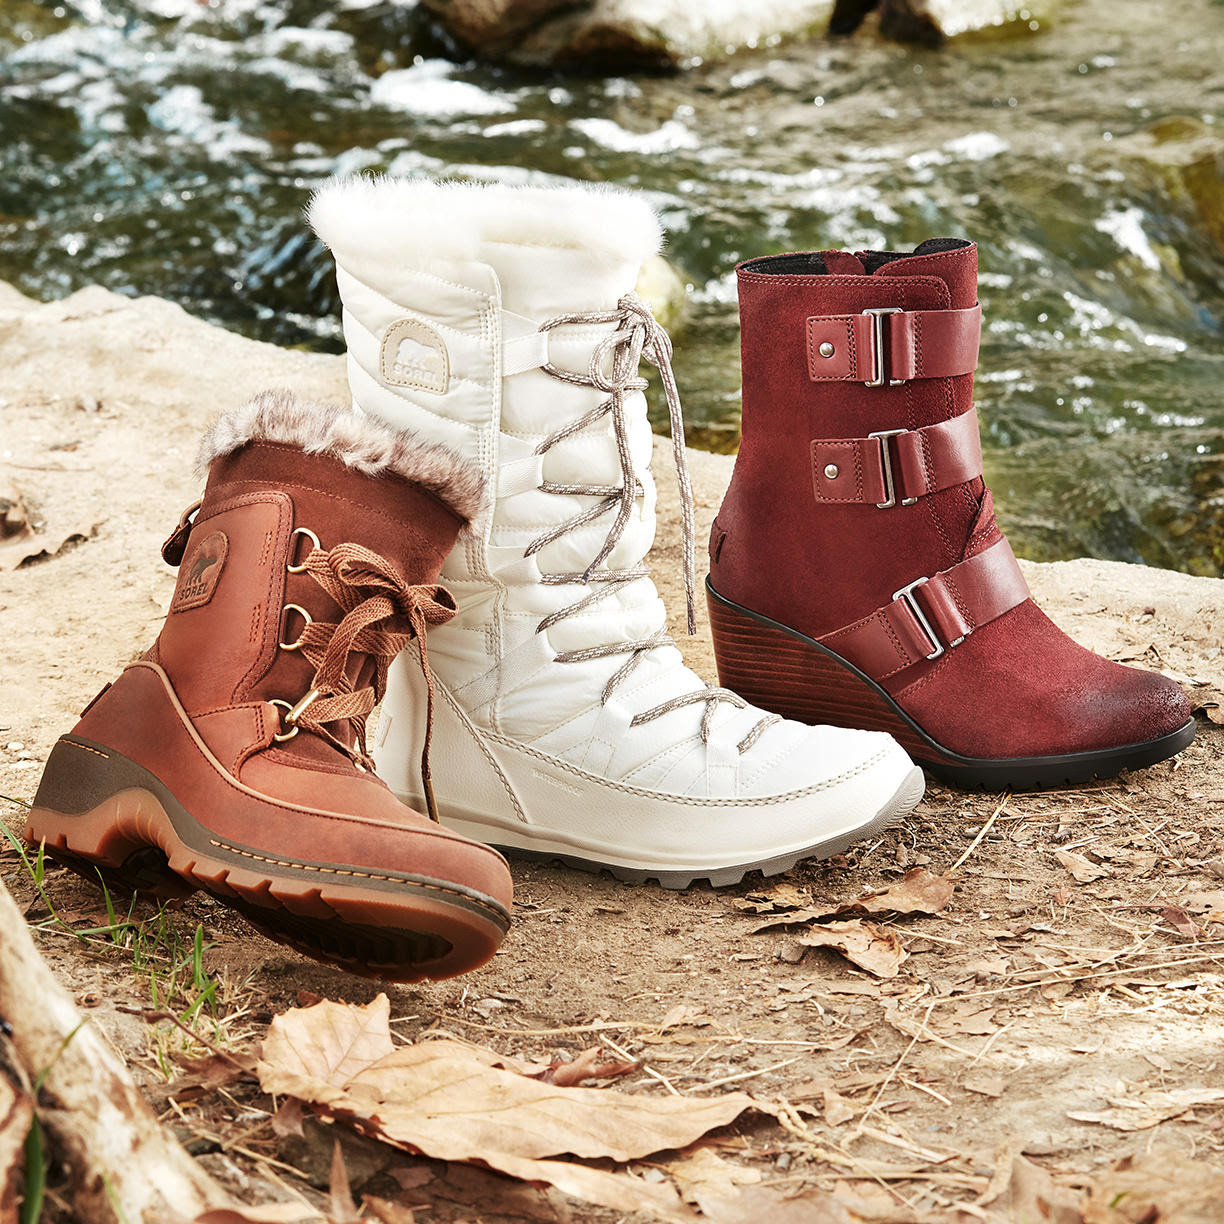 Sorel Women’s Shoes Up to 50% Off